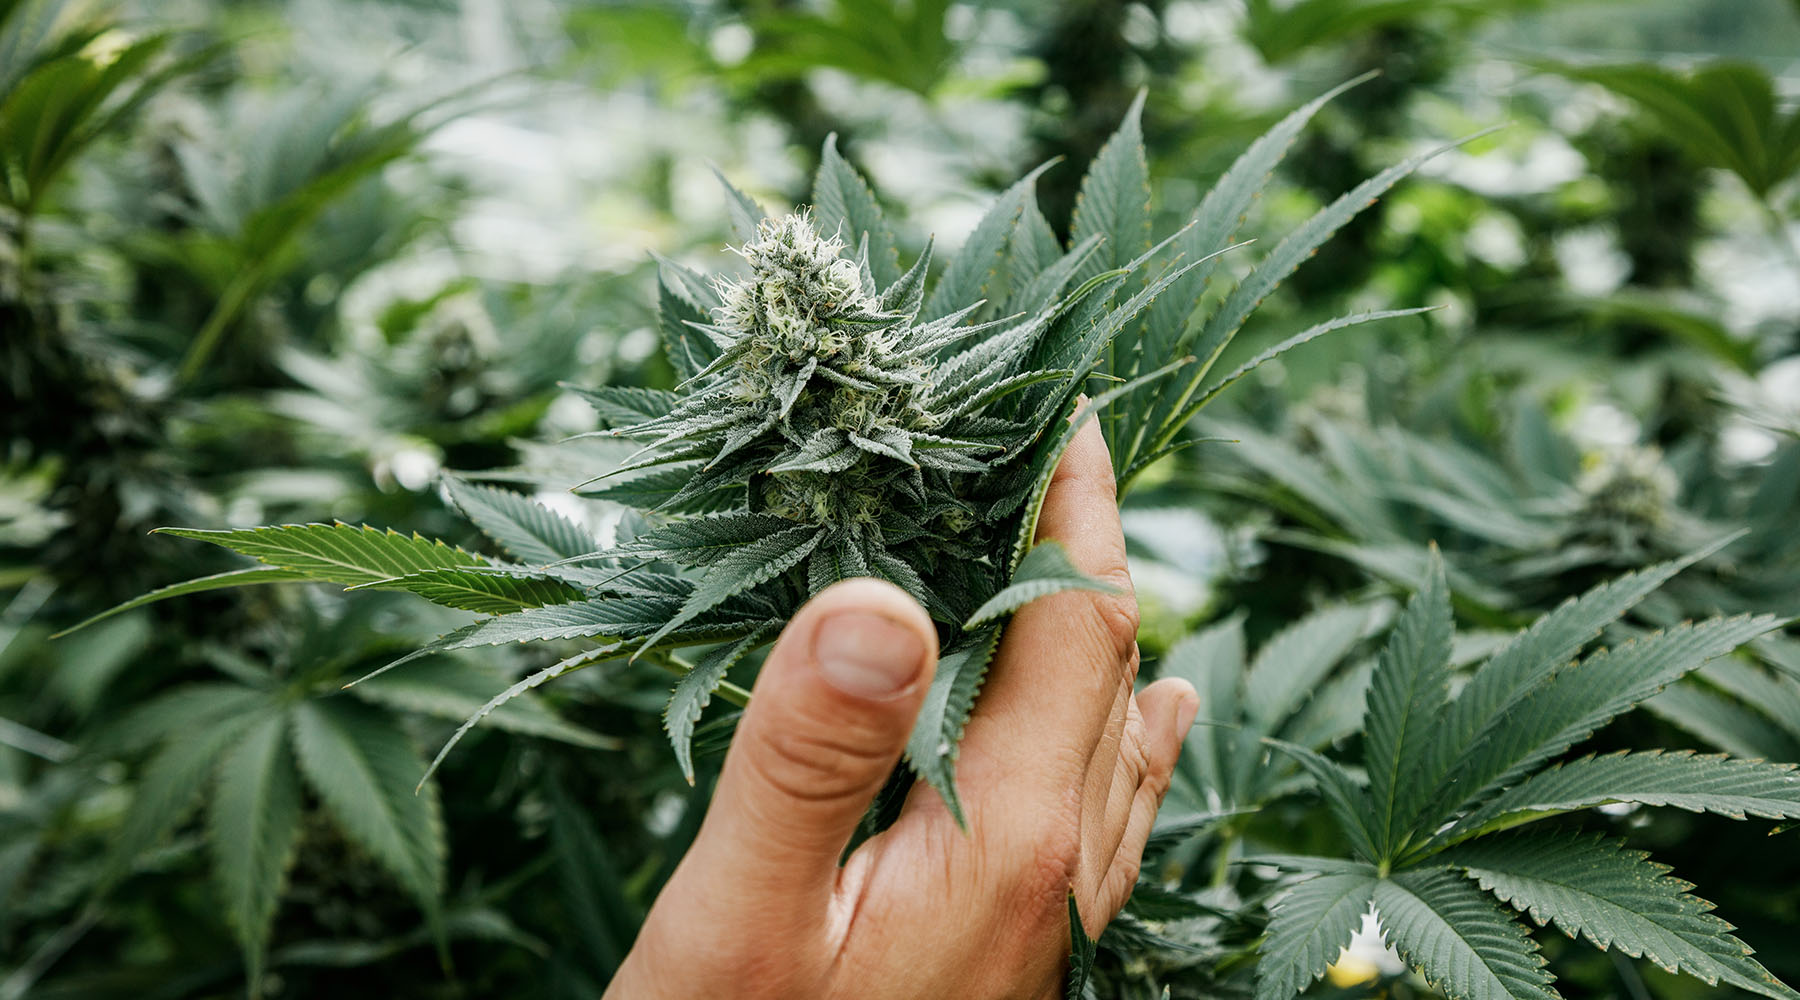 Grower hand picking cannabis plant in greenhouse